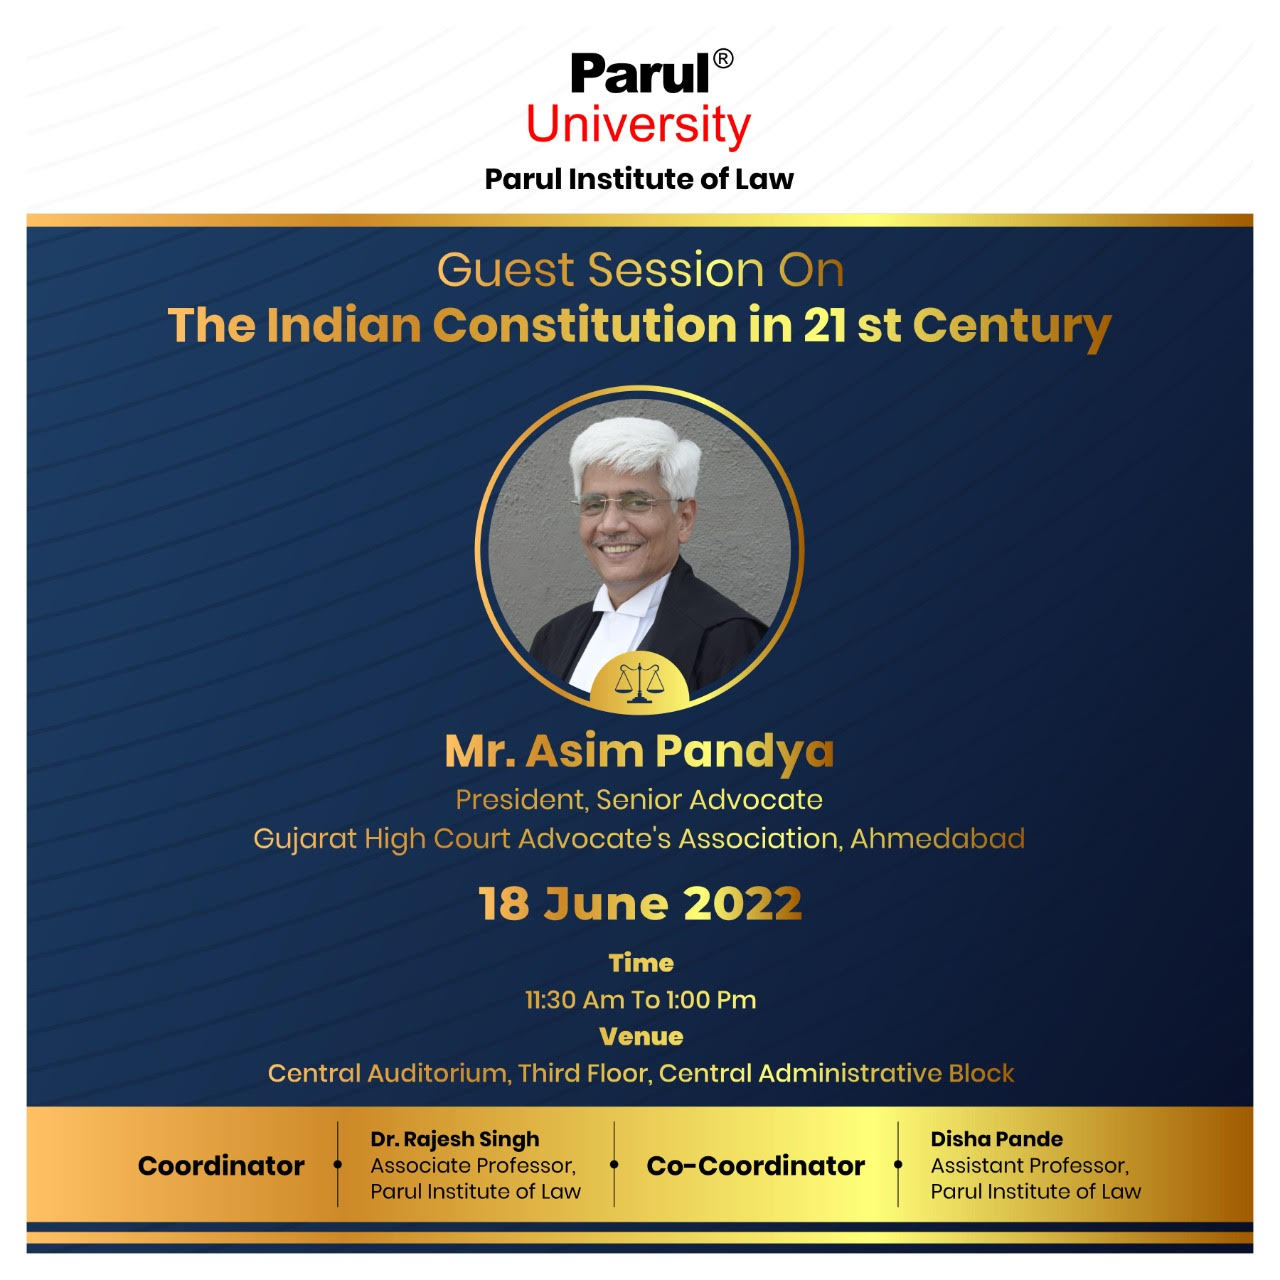 Mr. Asim Pandya joins PU for a talk session on the Indian Constituion in 21st century